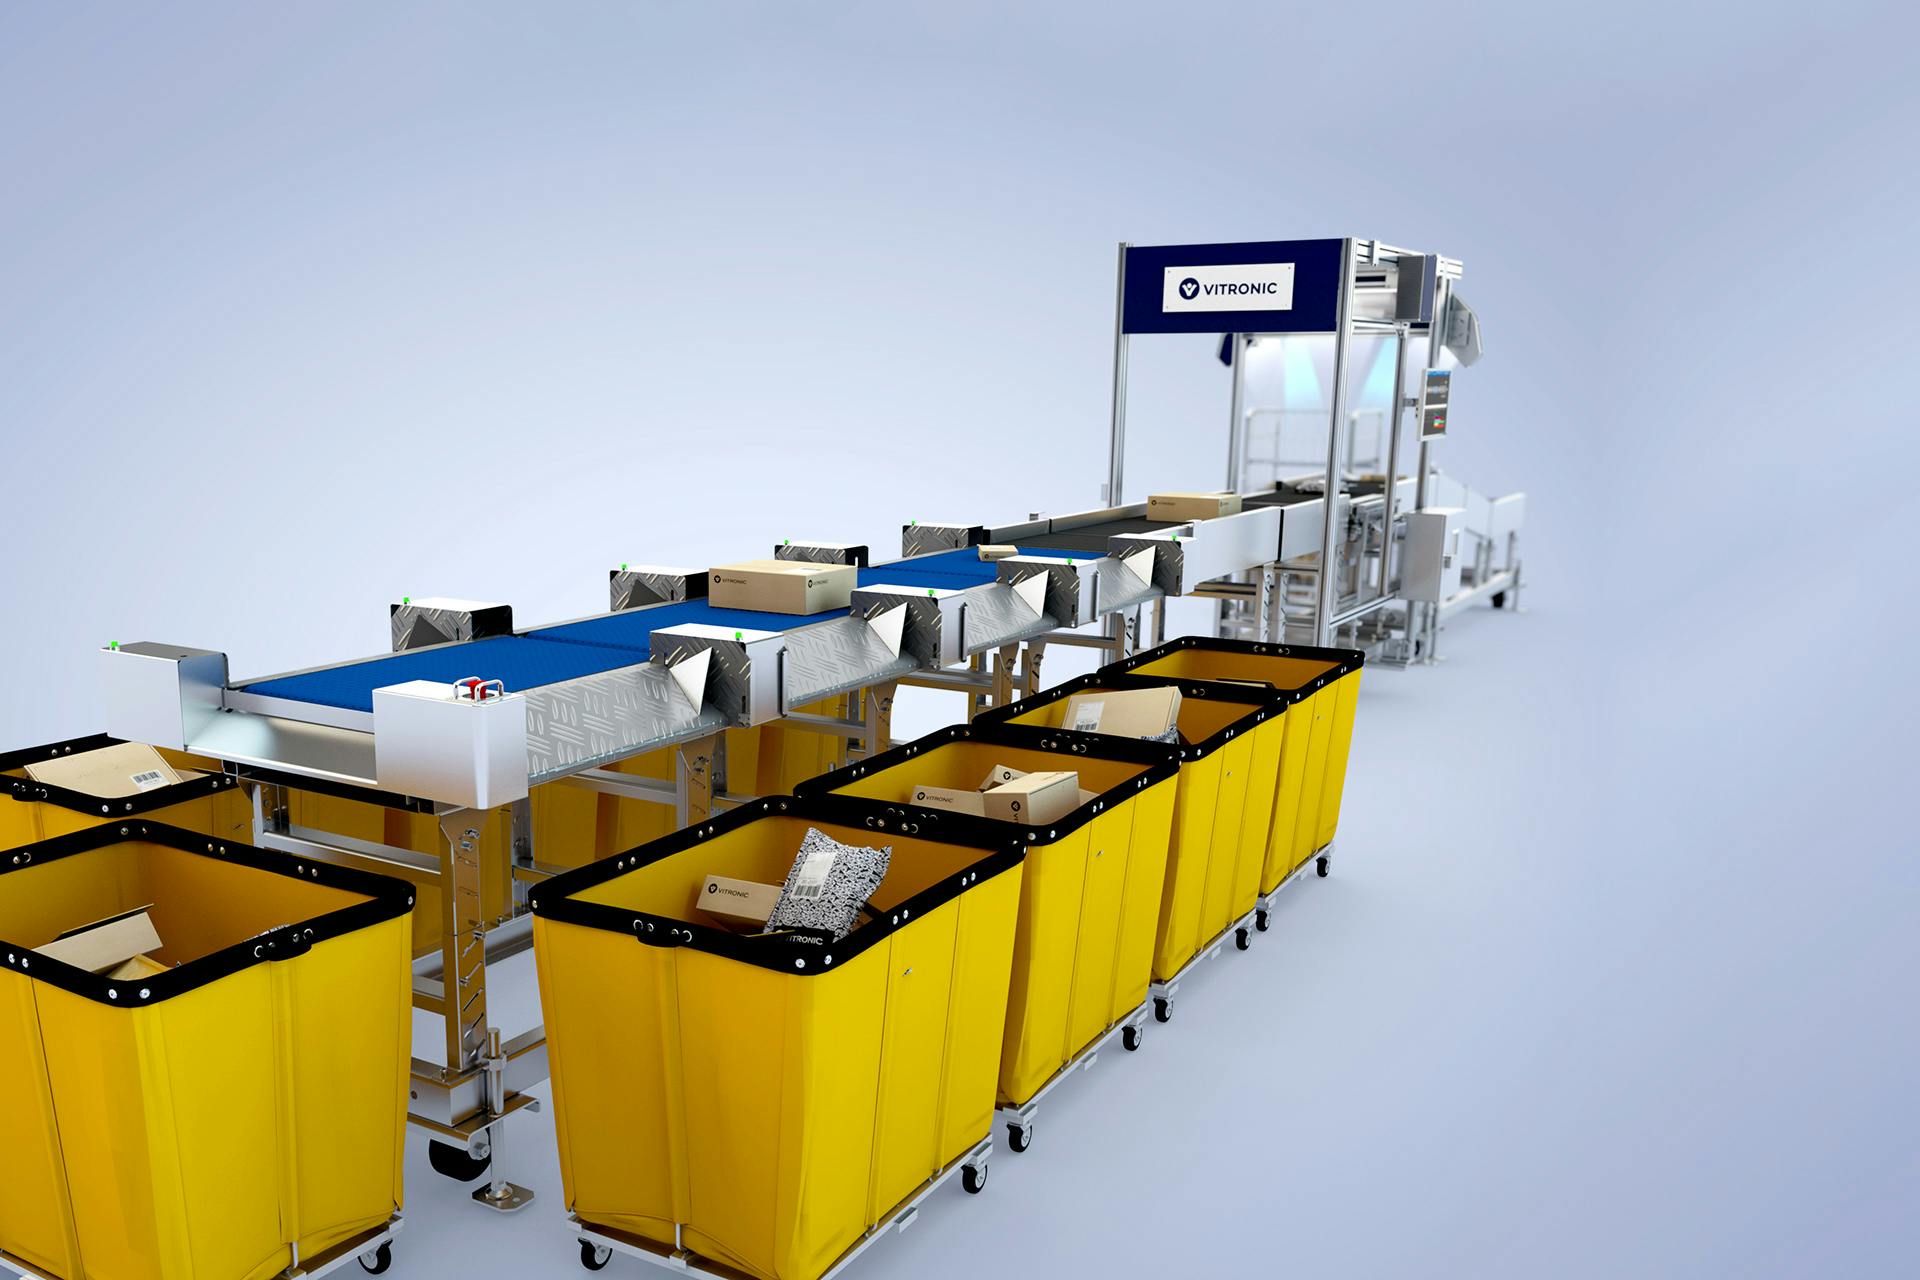 VITRONIC sorting systems can handle any volume and sort all parcel sizes and consignment types.